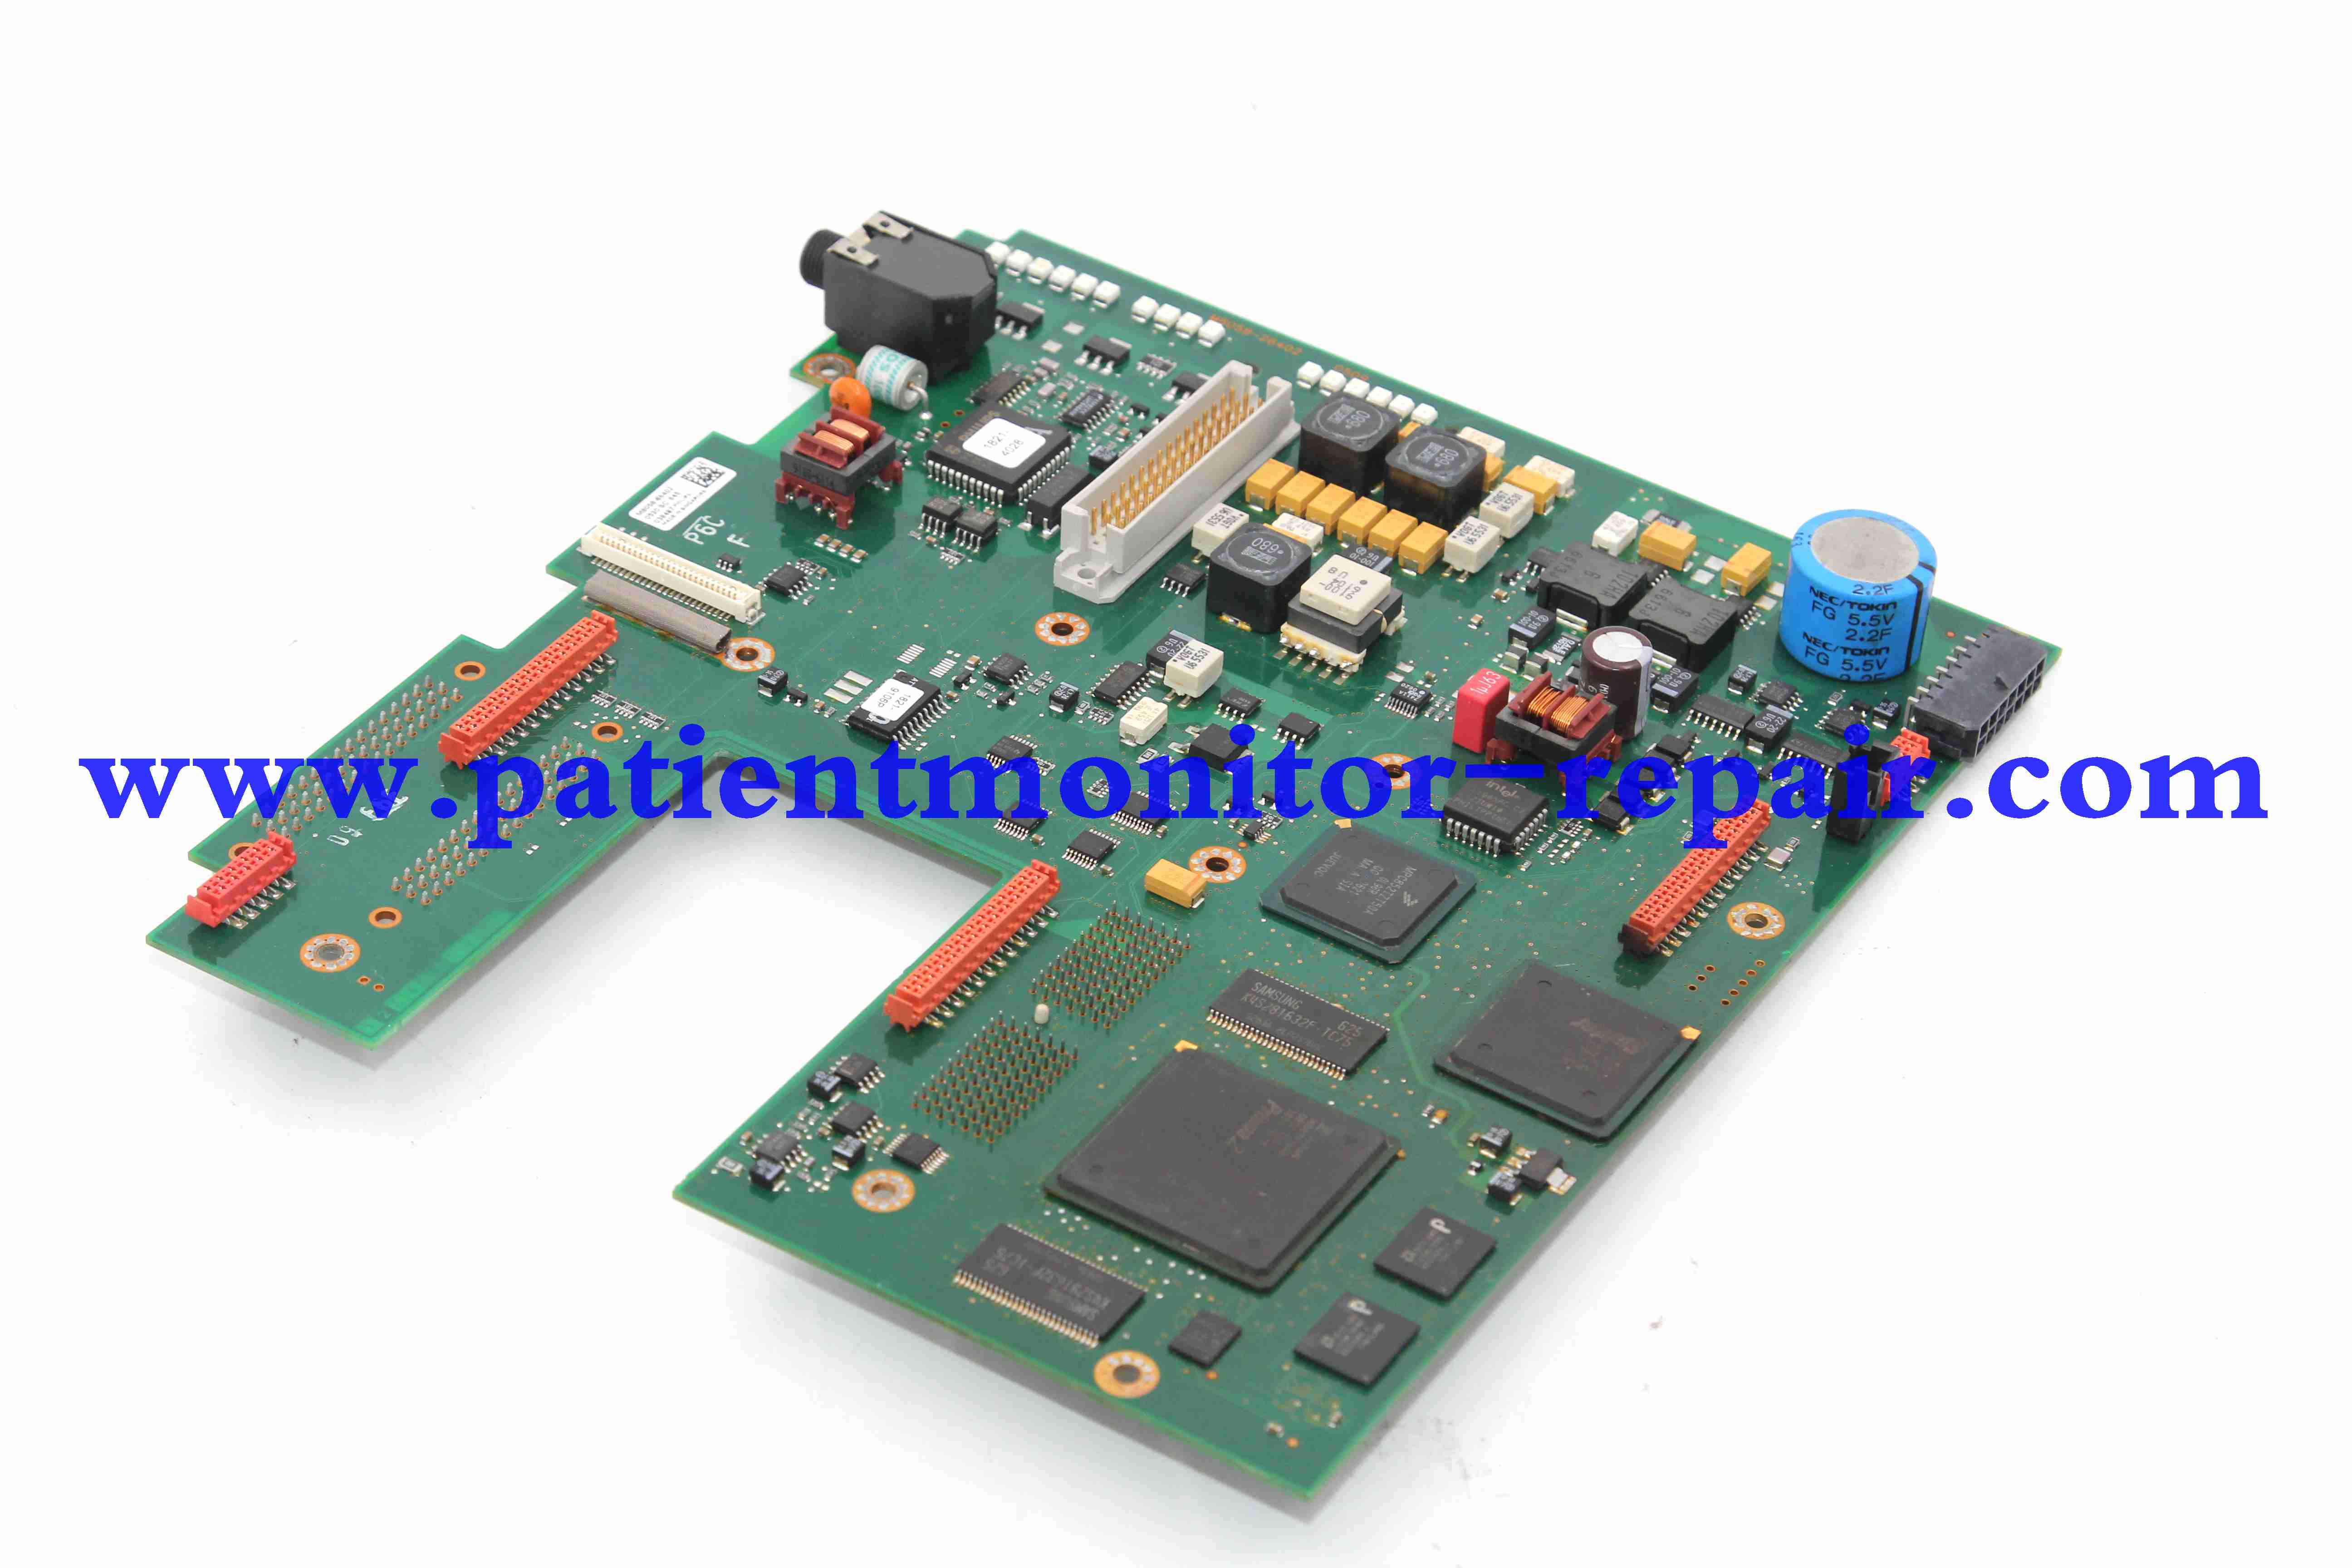  IntelliVue MP30 MP20 patient monitor mainboard PN M8058-66402